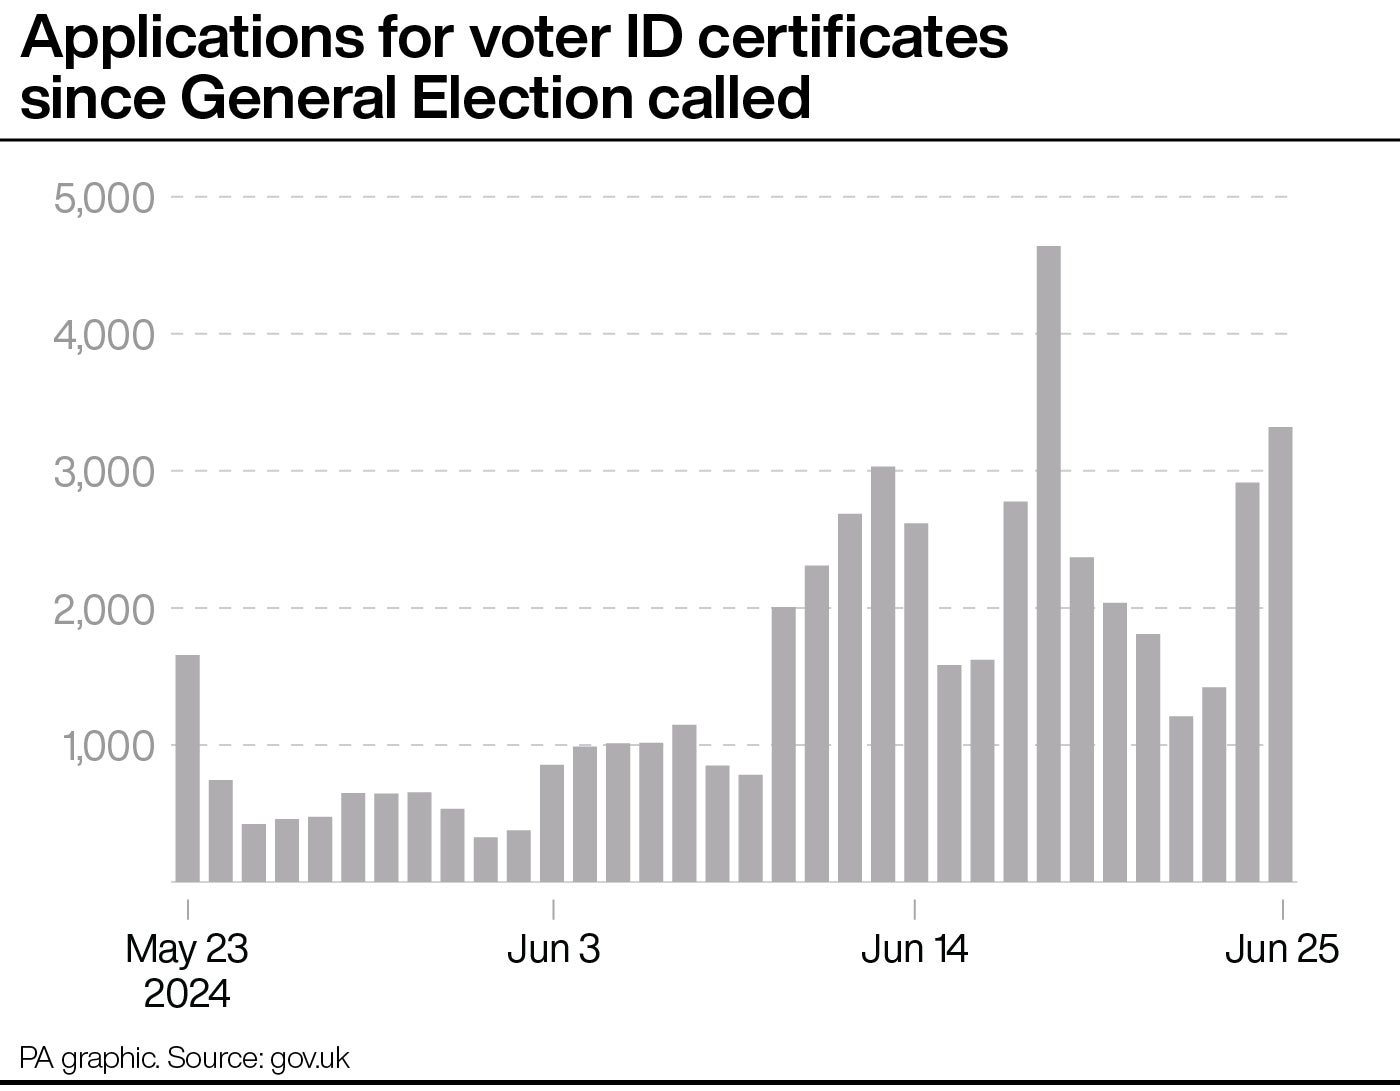 Applications for voter ID certificates since the General Election was called (PA Graphics)